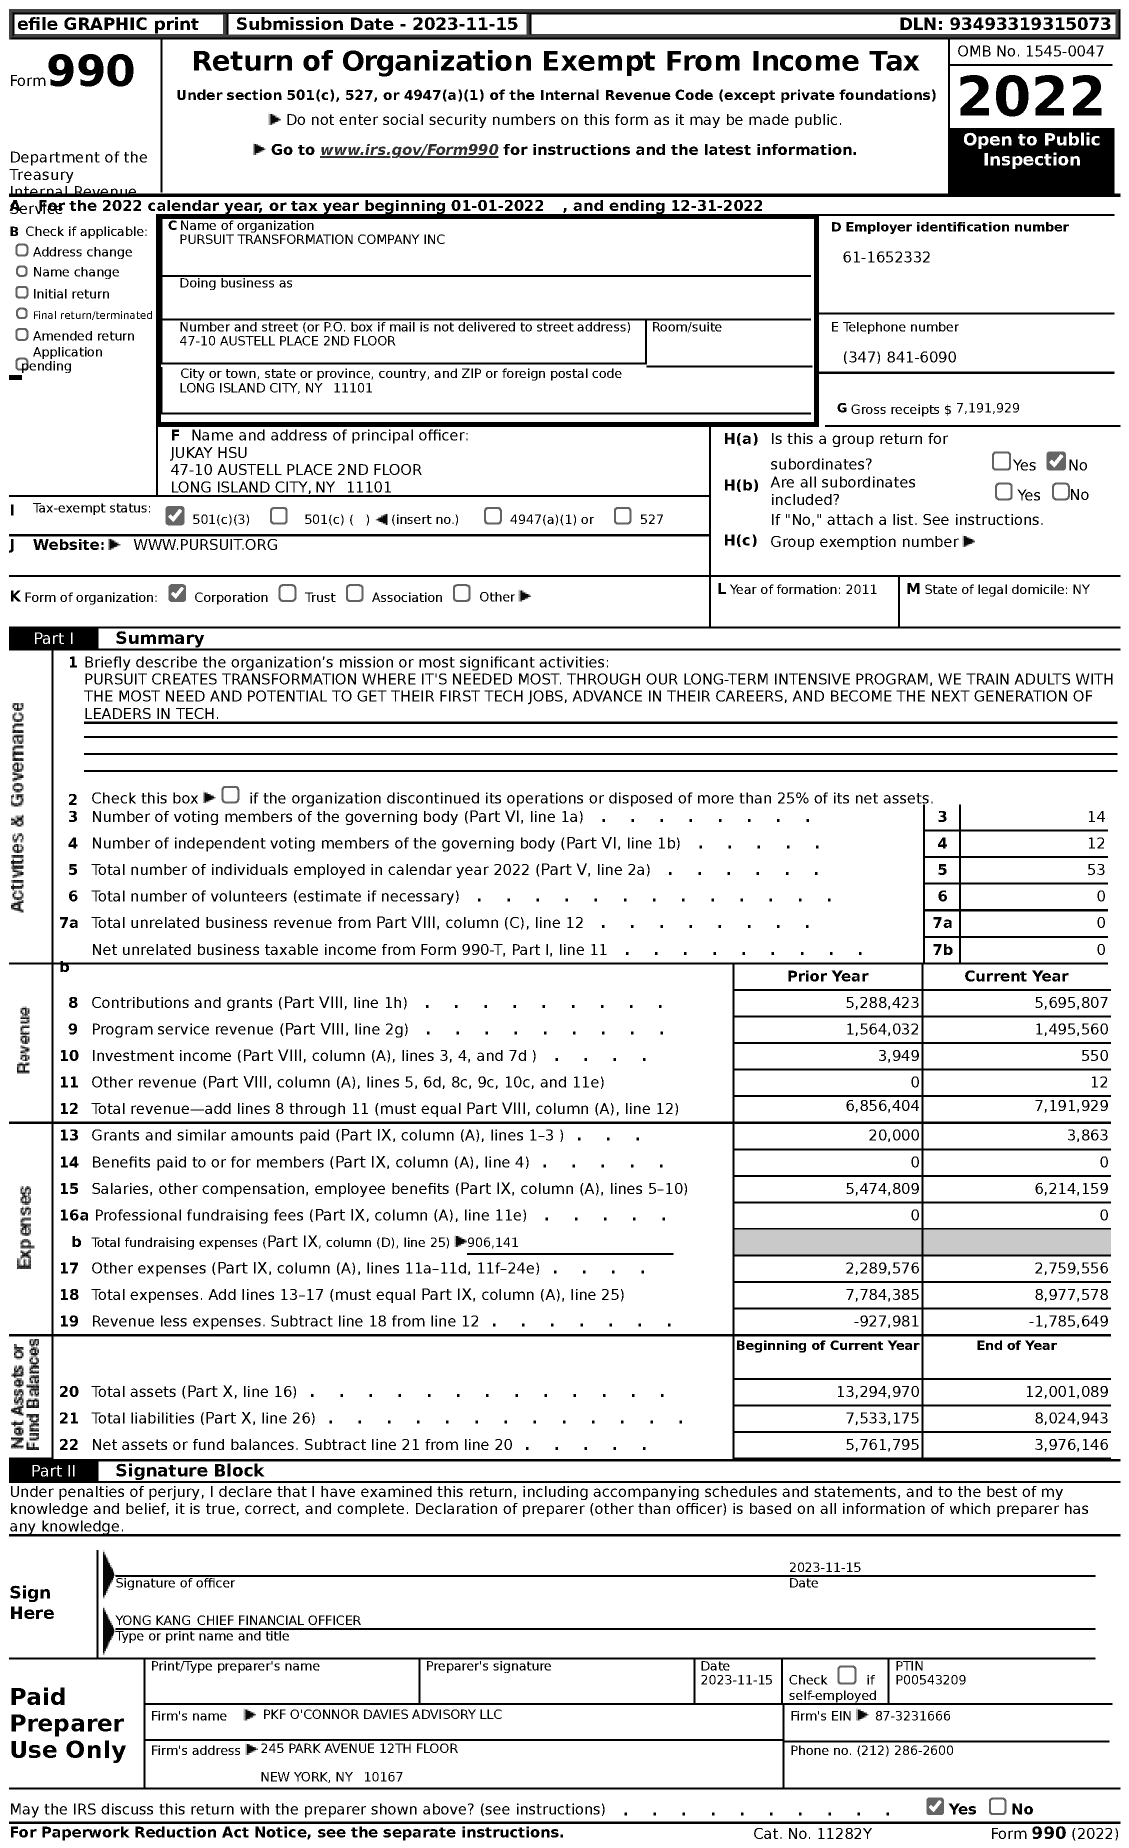 Image of first page of 2022 Form 990 for Pursuit Transformation Company